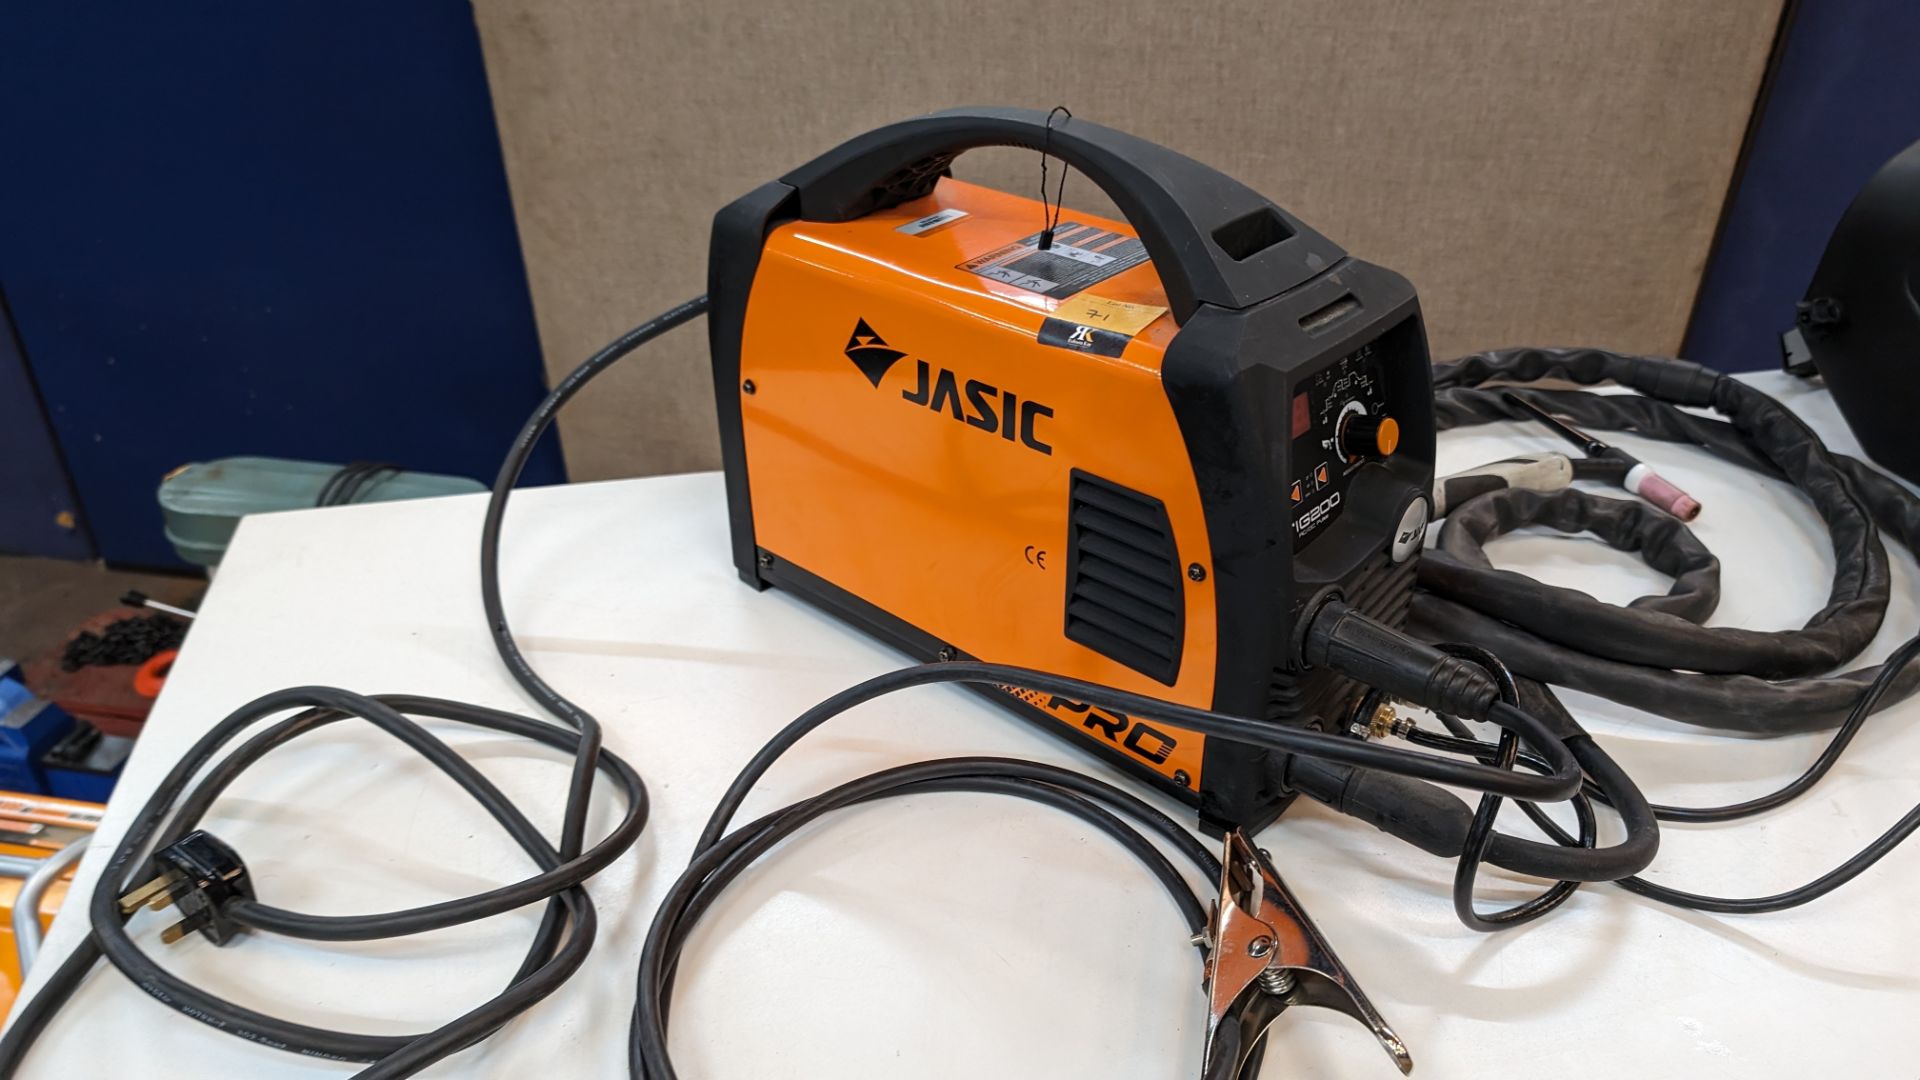 Jasic Pro tig 200 AC/DC pulse welder, including welding mask, box of consumables & other items as pi - Image 4 of 23